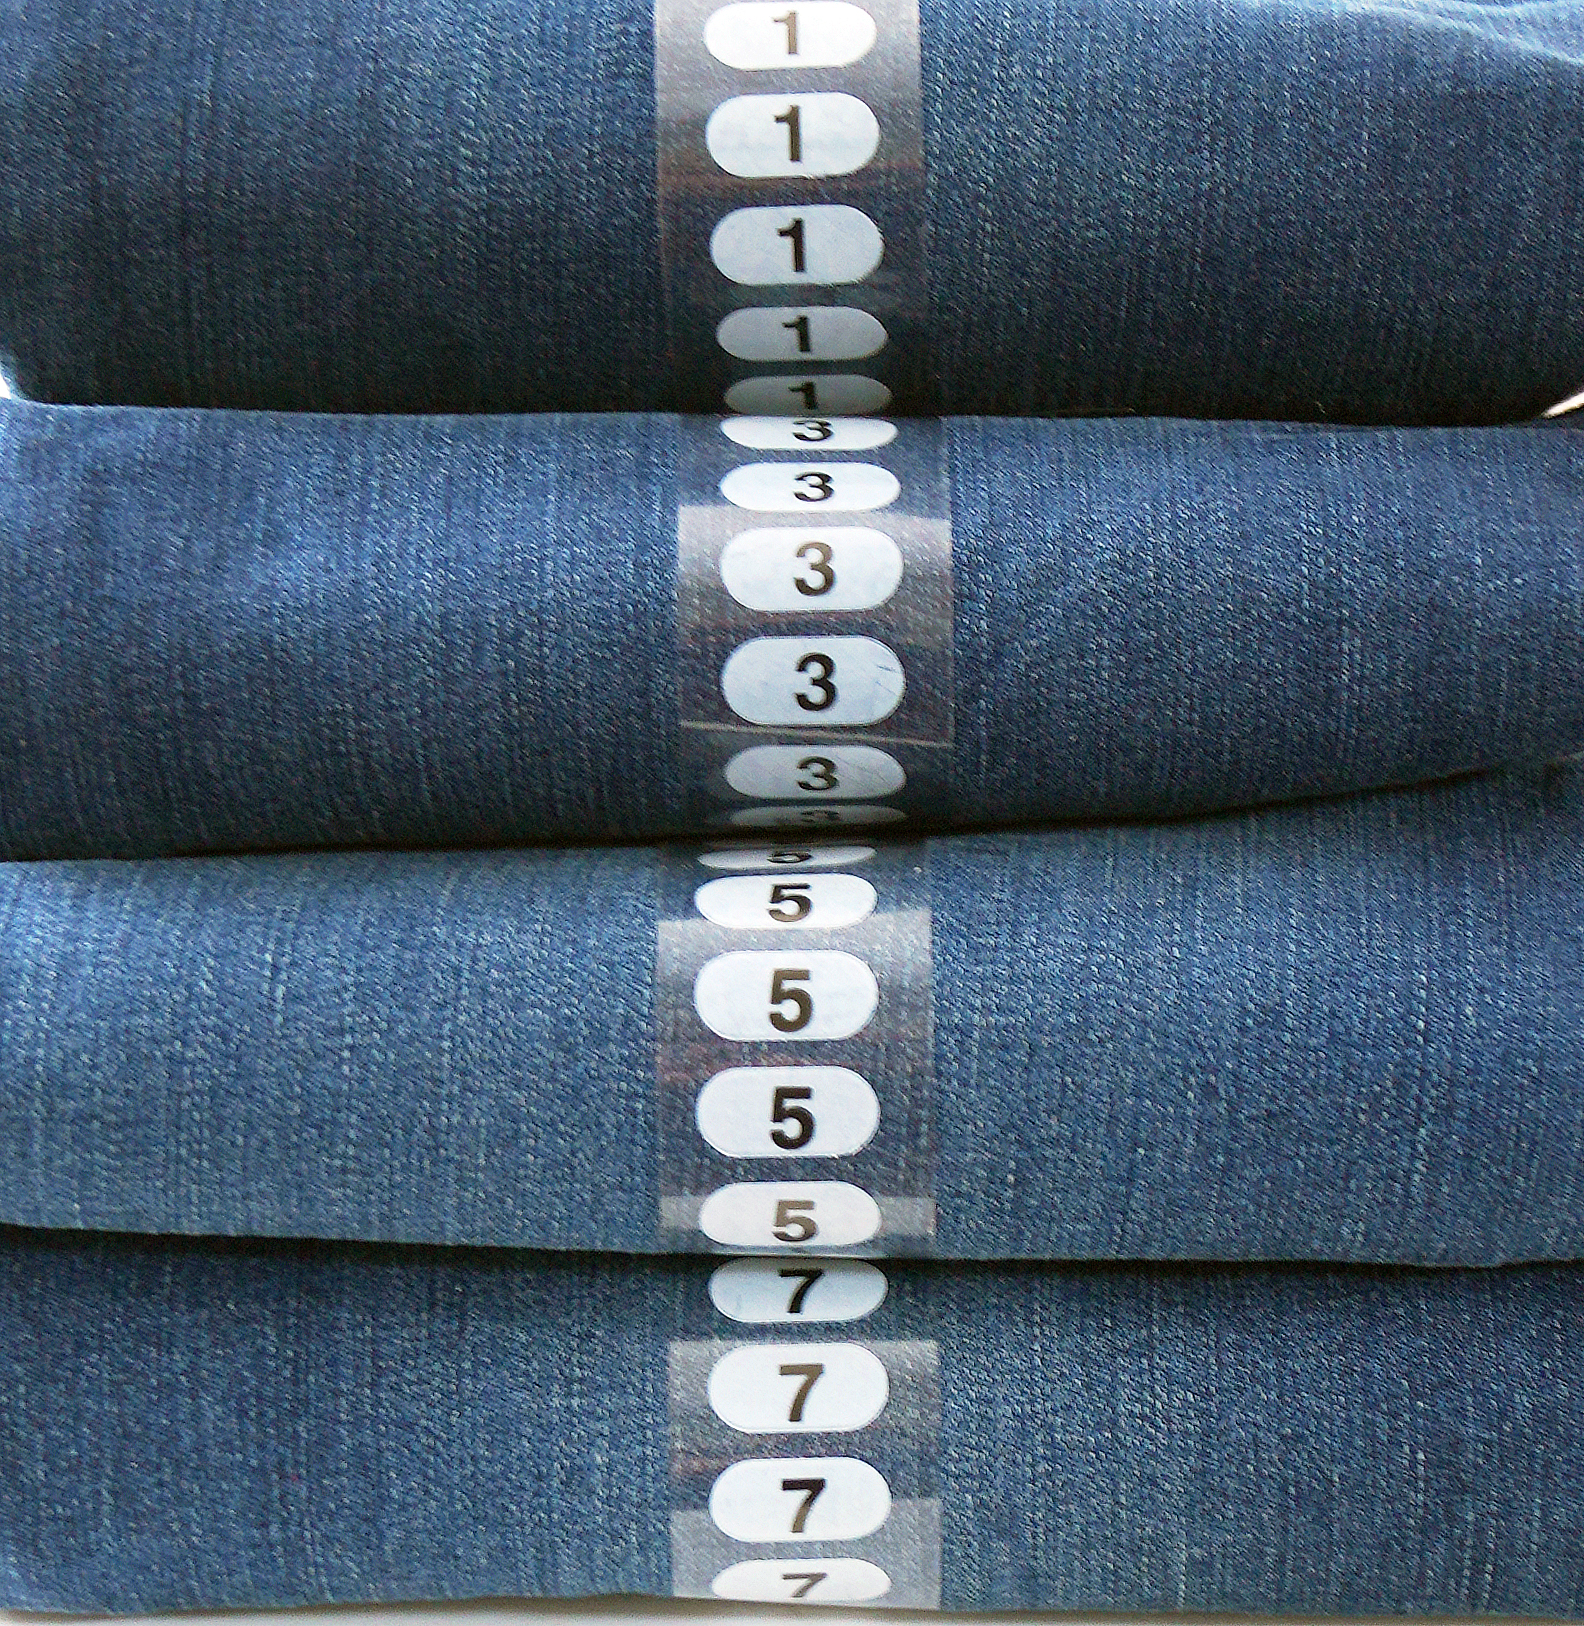 How to convert juniors' clothing sizes to girls' or womens' sizes - Quora